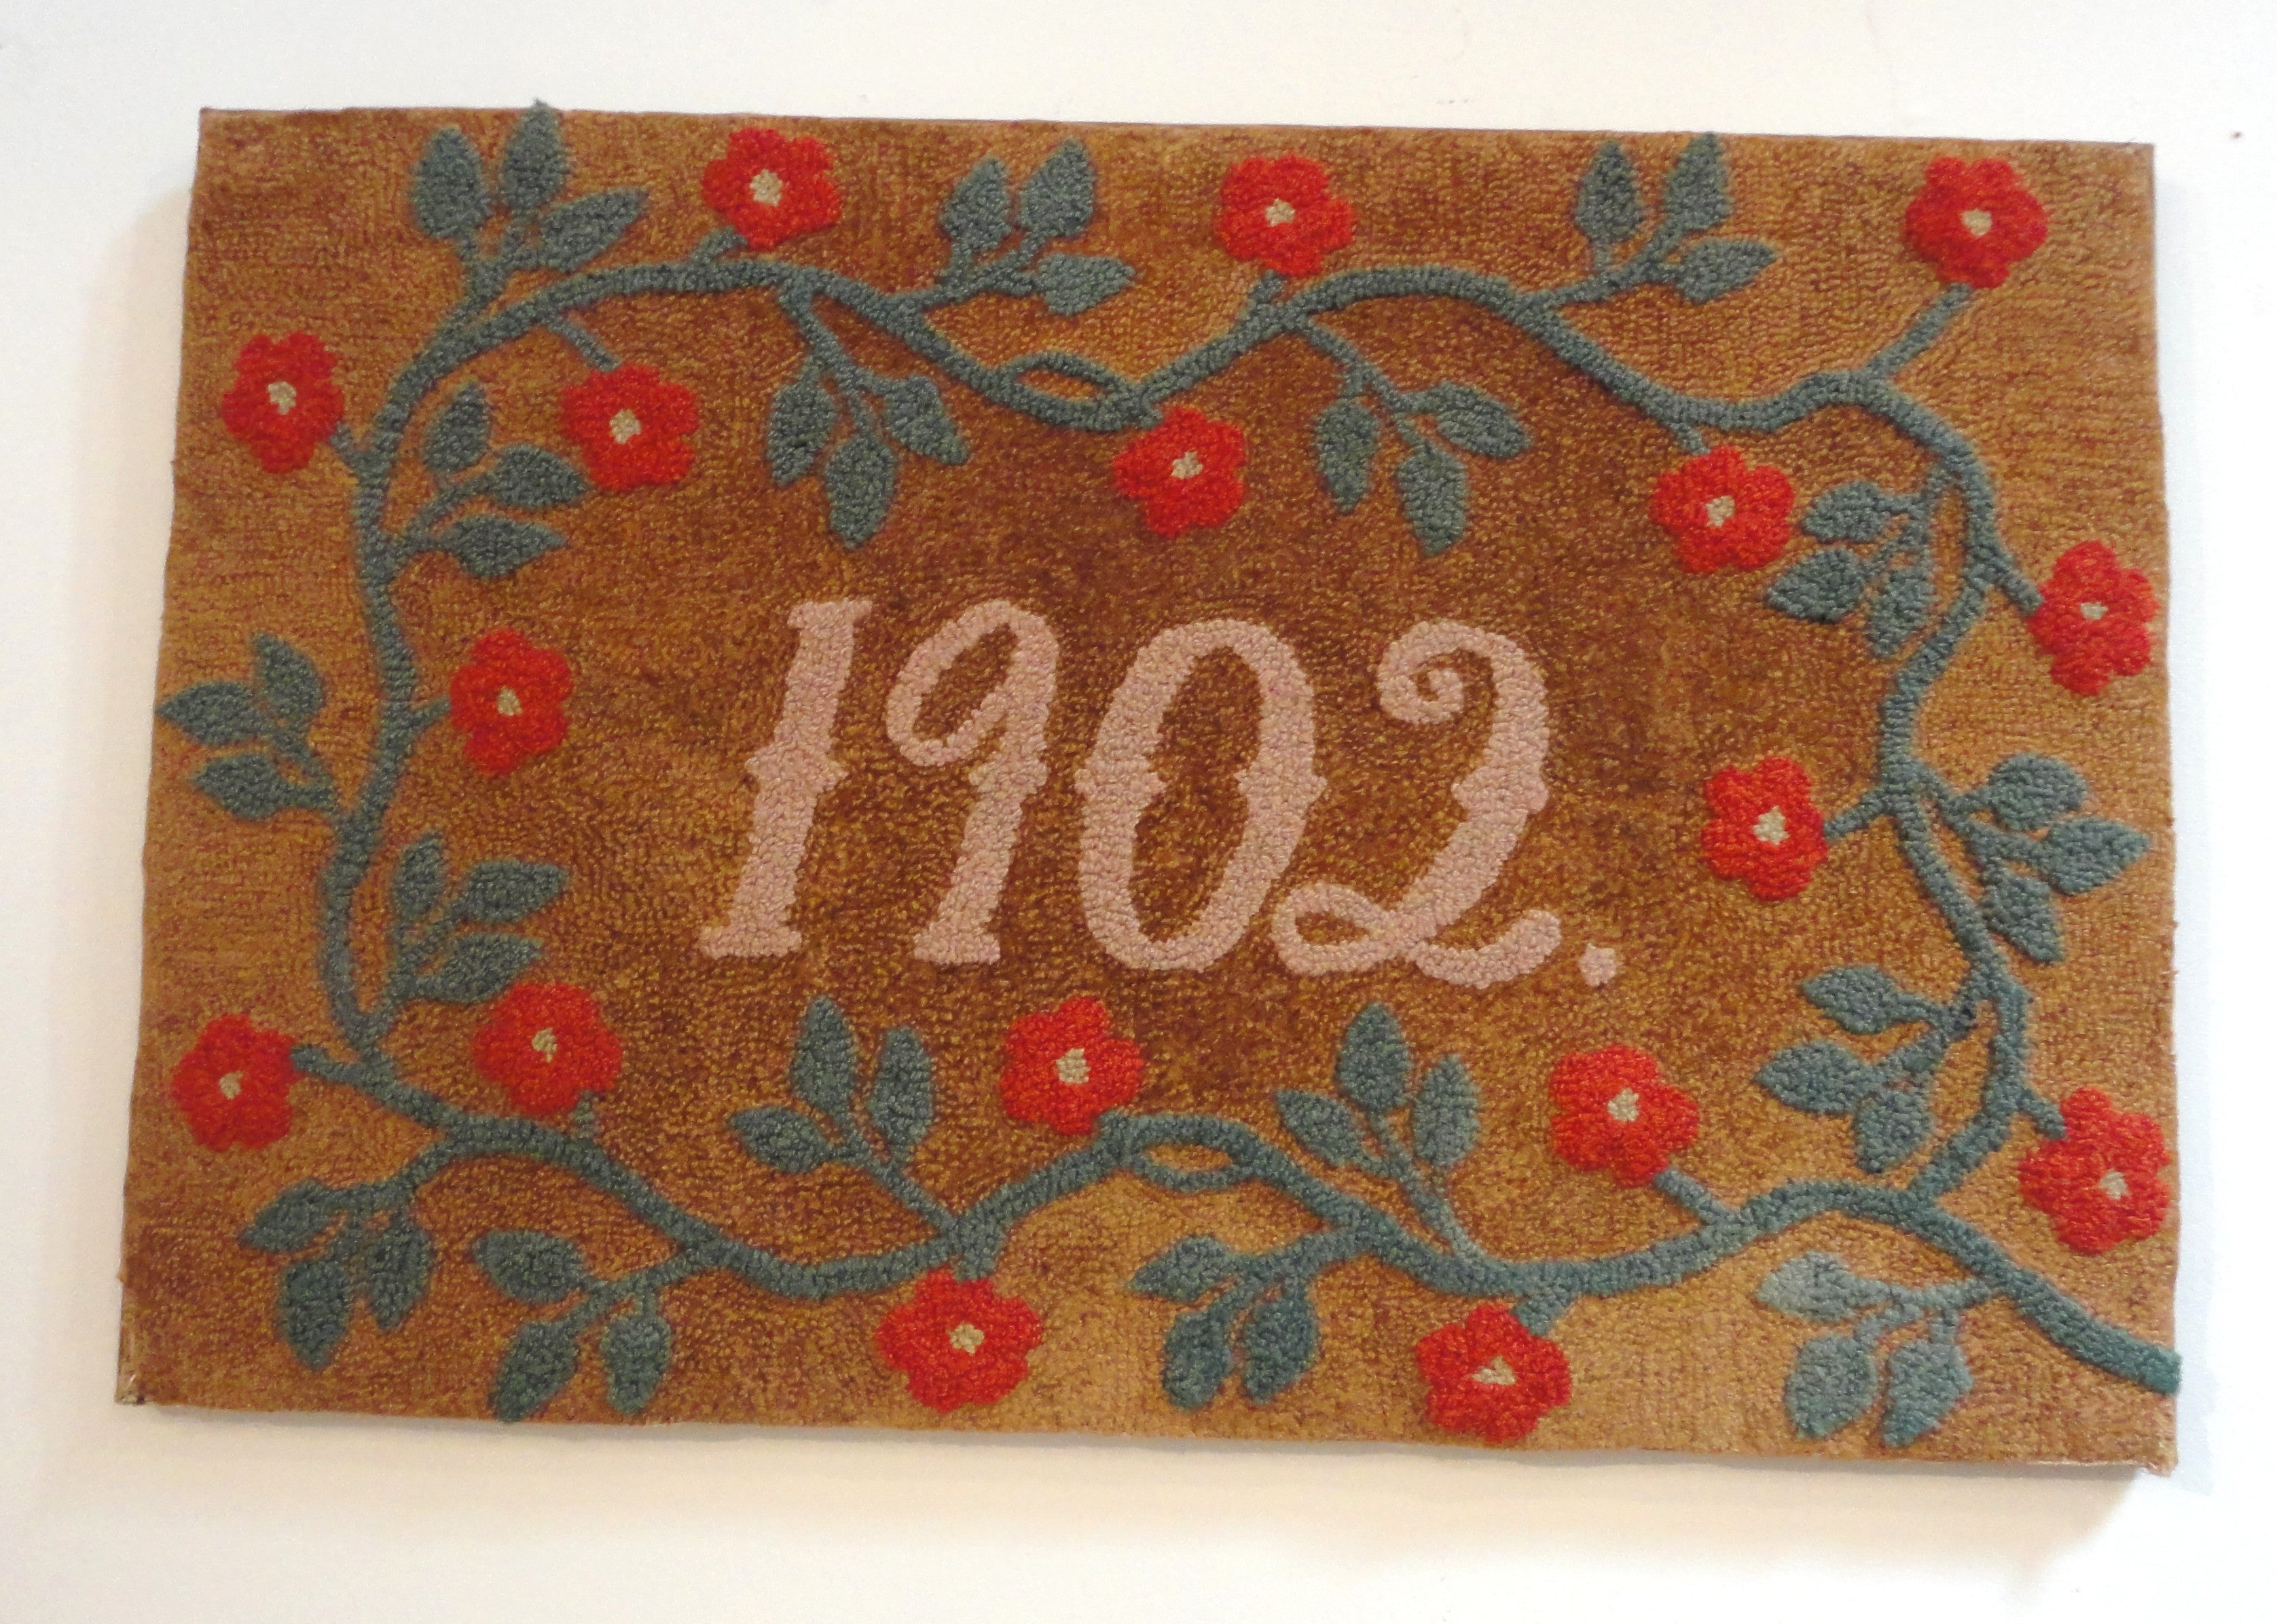 Mounted Hand Hooked Dated 1902 Rug W/ Vine Border